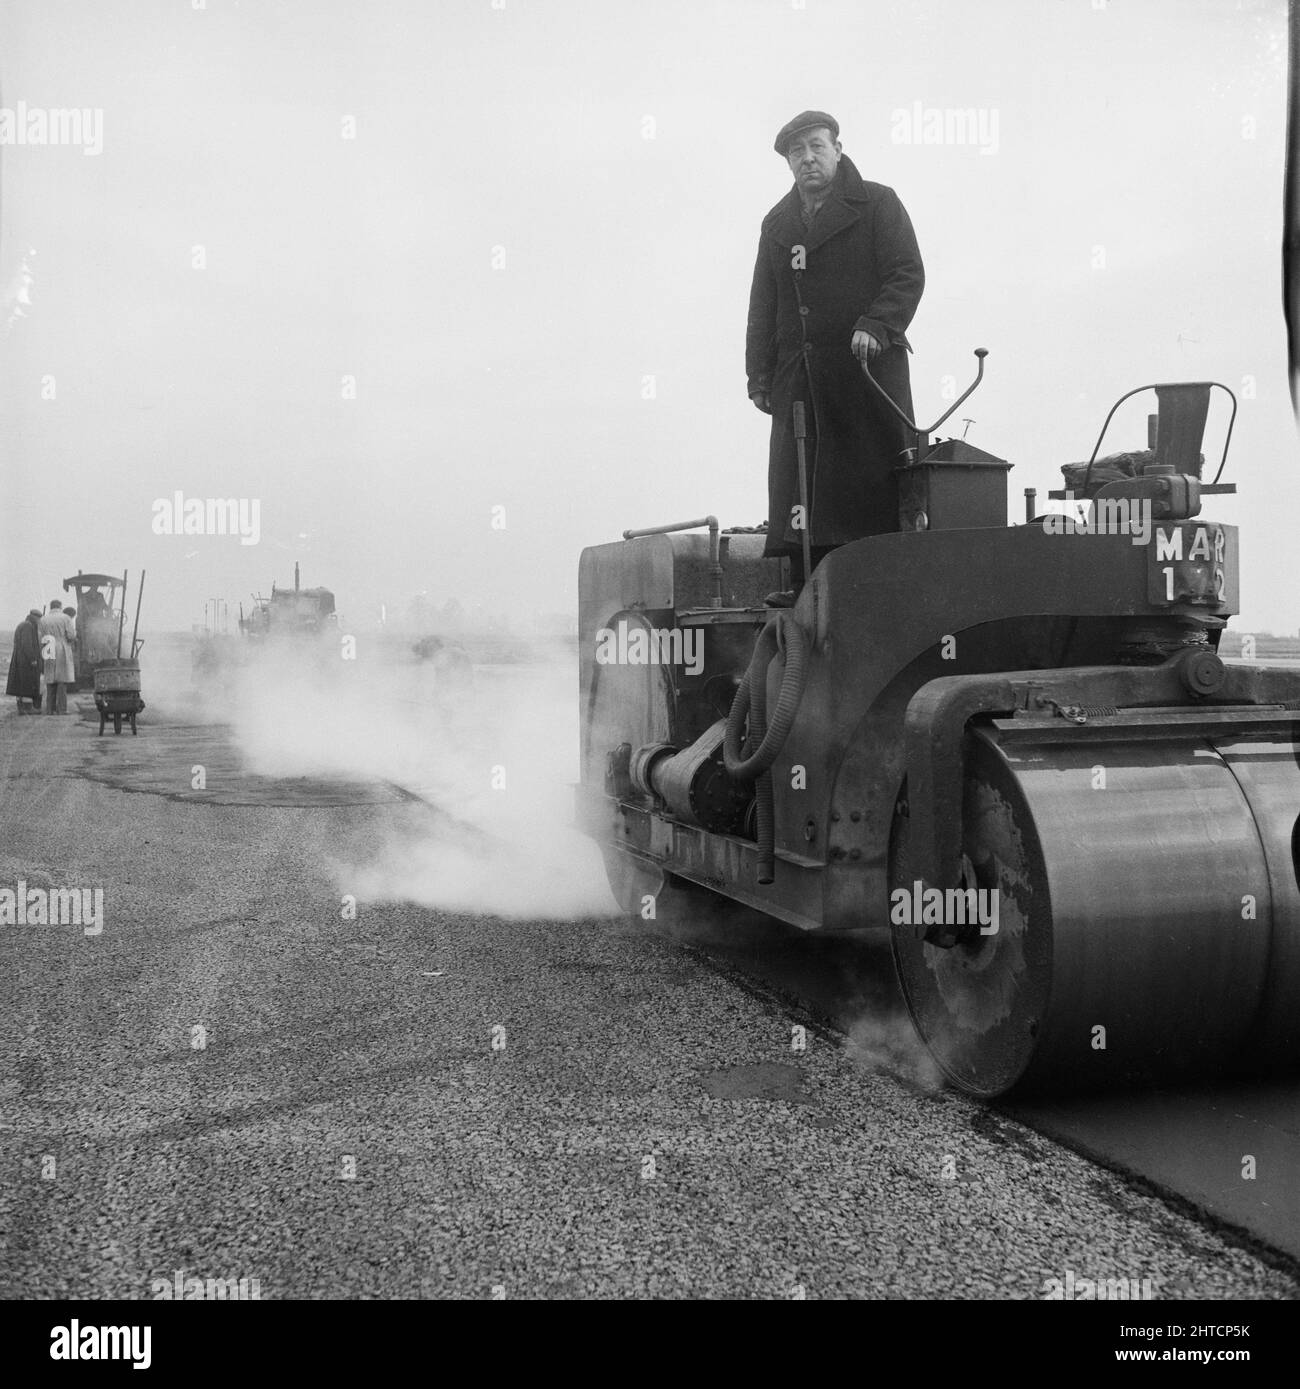 RAF Gaydon, Gaydon, Stratford-on-Avon, Warwickshire, 21/01/1953. A man standing on a roller during the laying of asphalt on a new runway under construction at Gaydon Airfield. Work began on the construction of a runway at Gaydon Airfield in early 1952. As part of the project, a former runway, largely abandoned following the Second World War, was superseded by a newly constructed runway nearly 1 3/4 miles long and 200 feet wide. Also built were access tracks and a taxi-track. The runway was constructed on 8 inches of hardcore, with four inches of concrete laid on top, followed by 12 inches of h Stock Photo